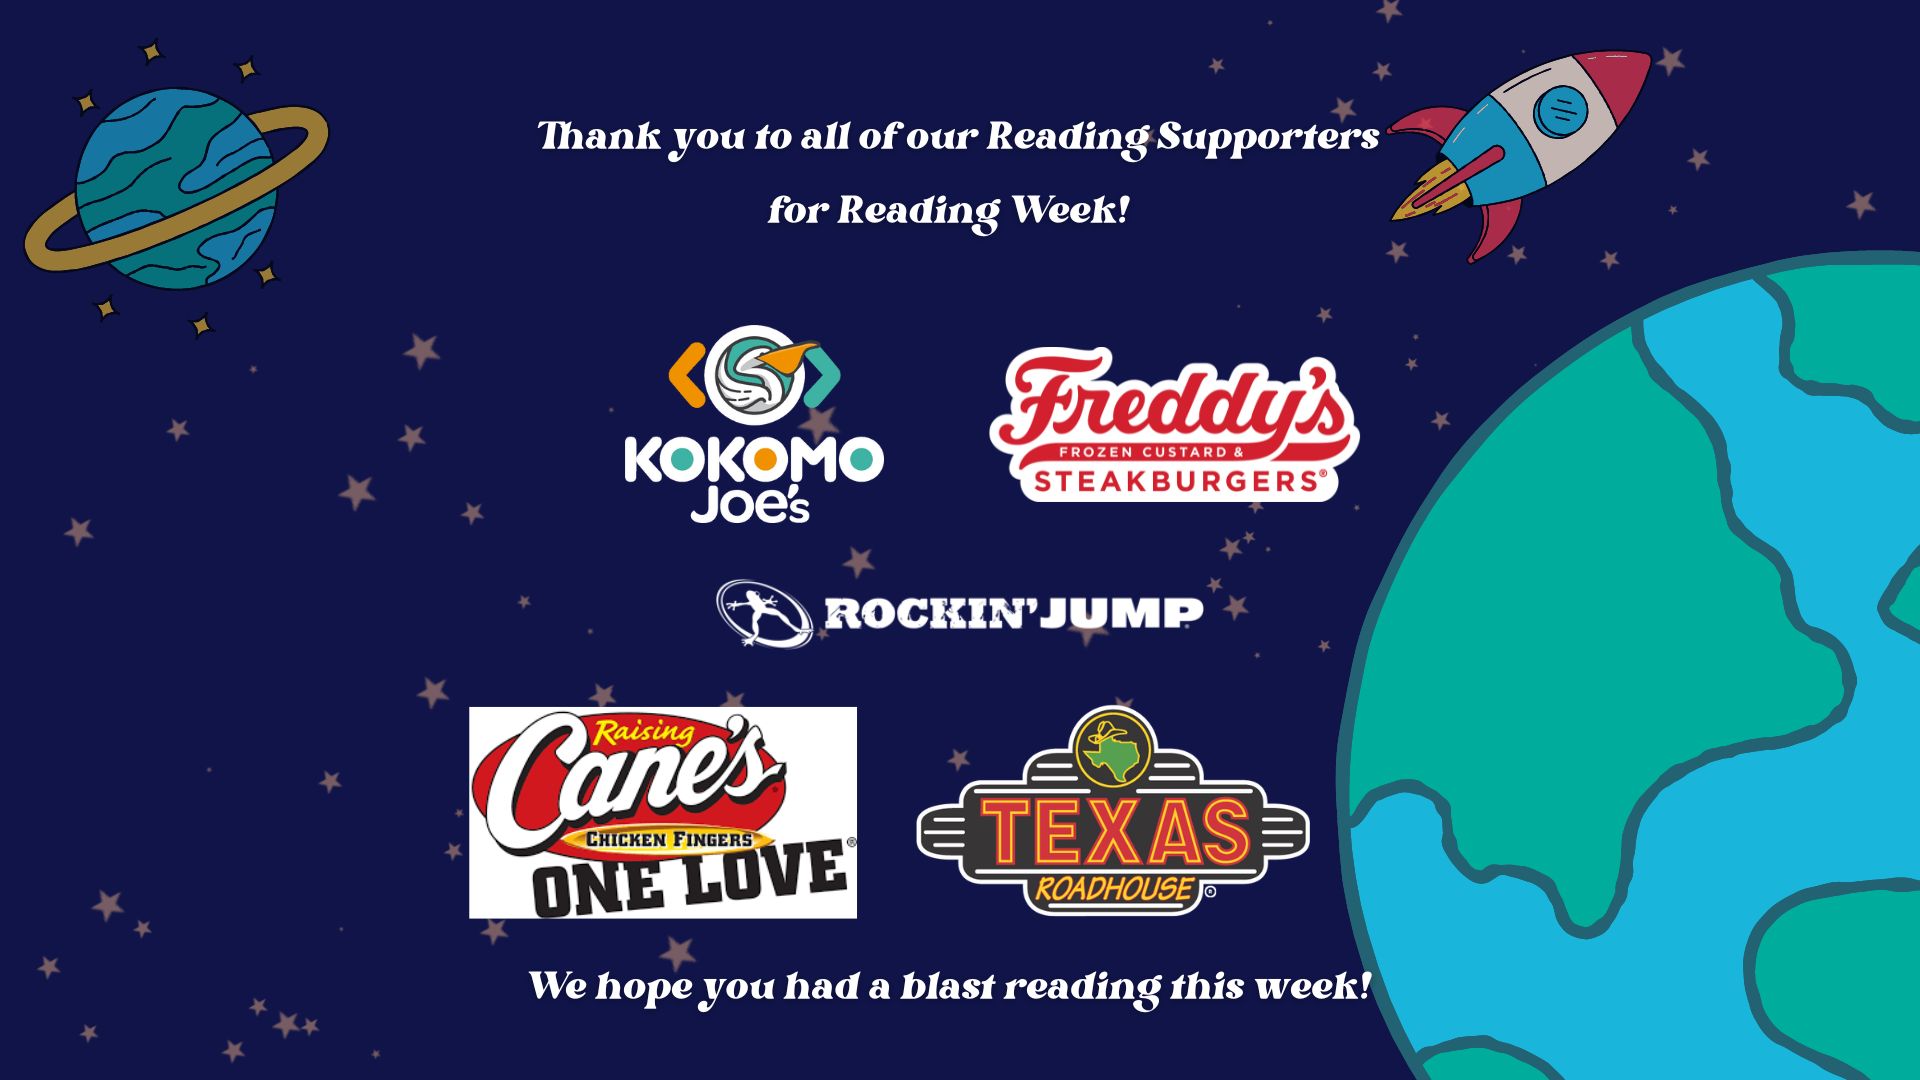 Thank you Reading Week community supporters